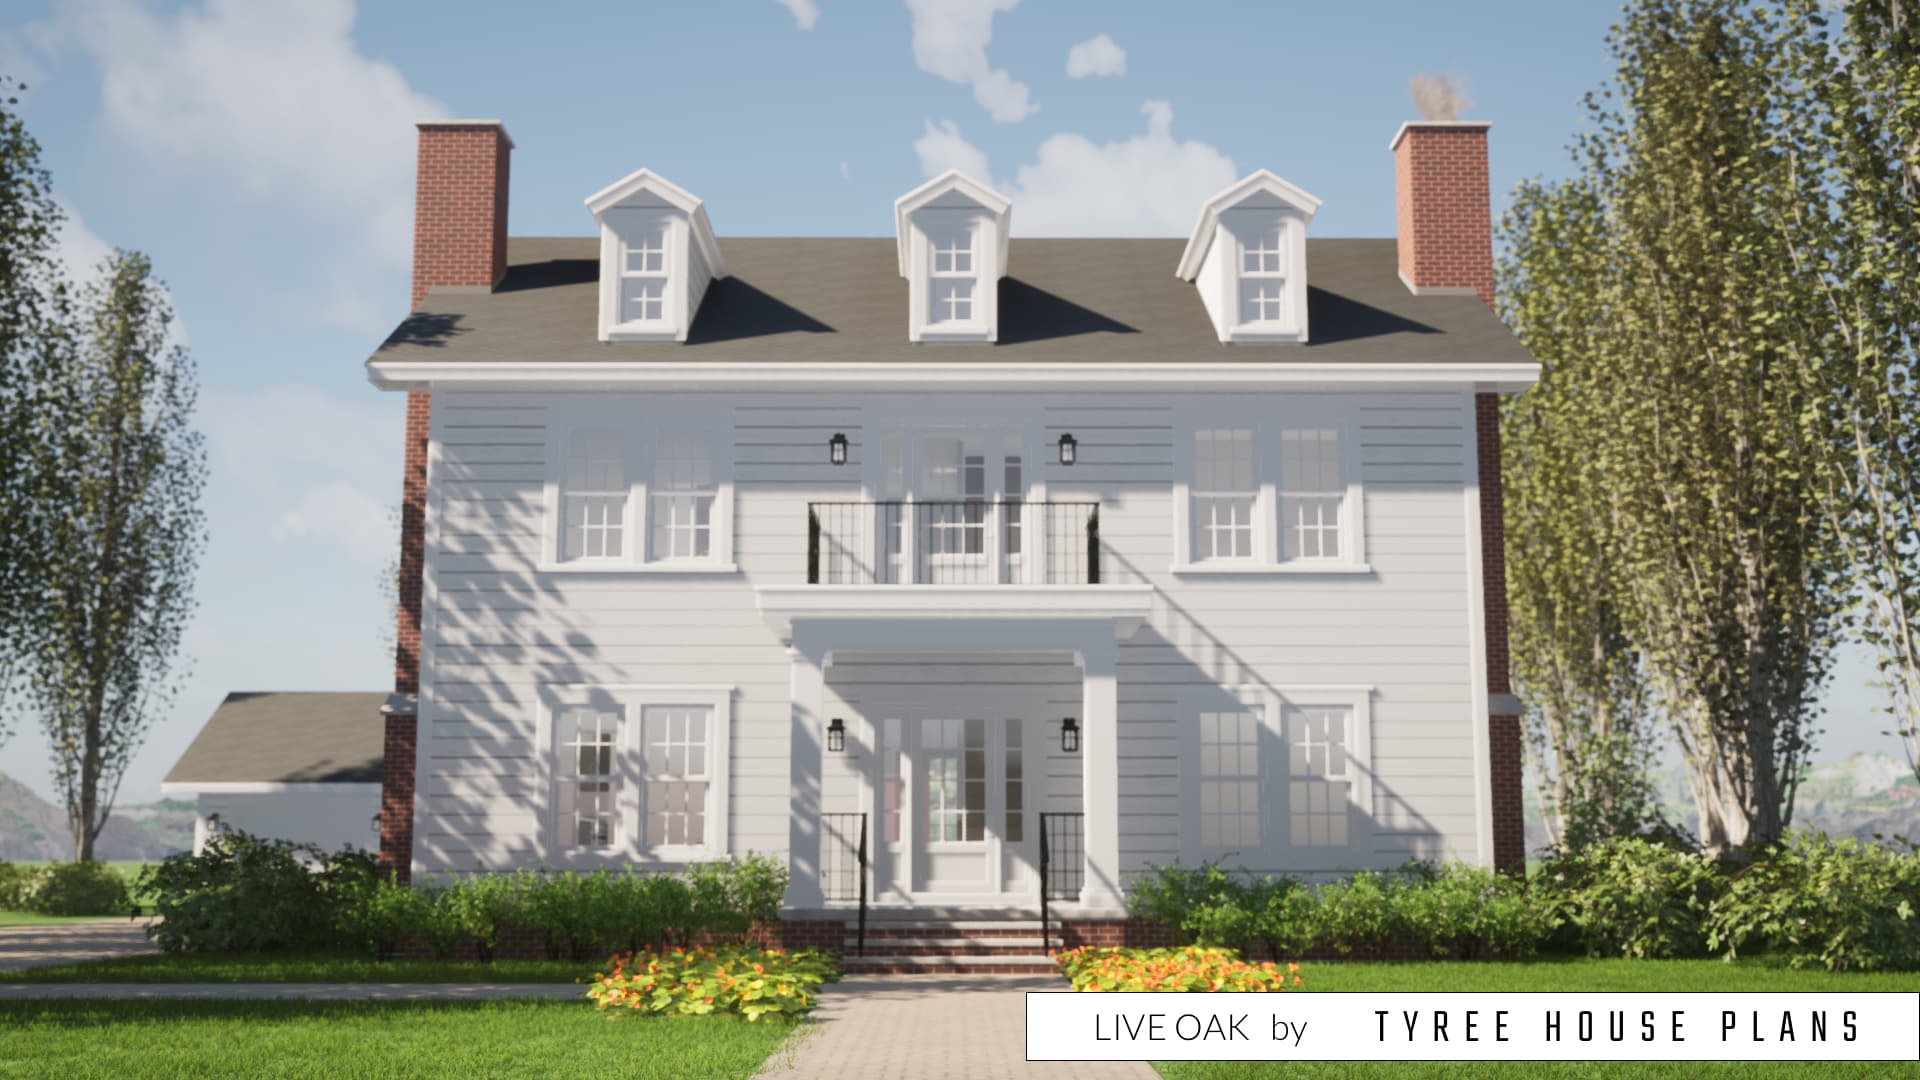 Live Oak House Plan by Tyree House Plans